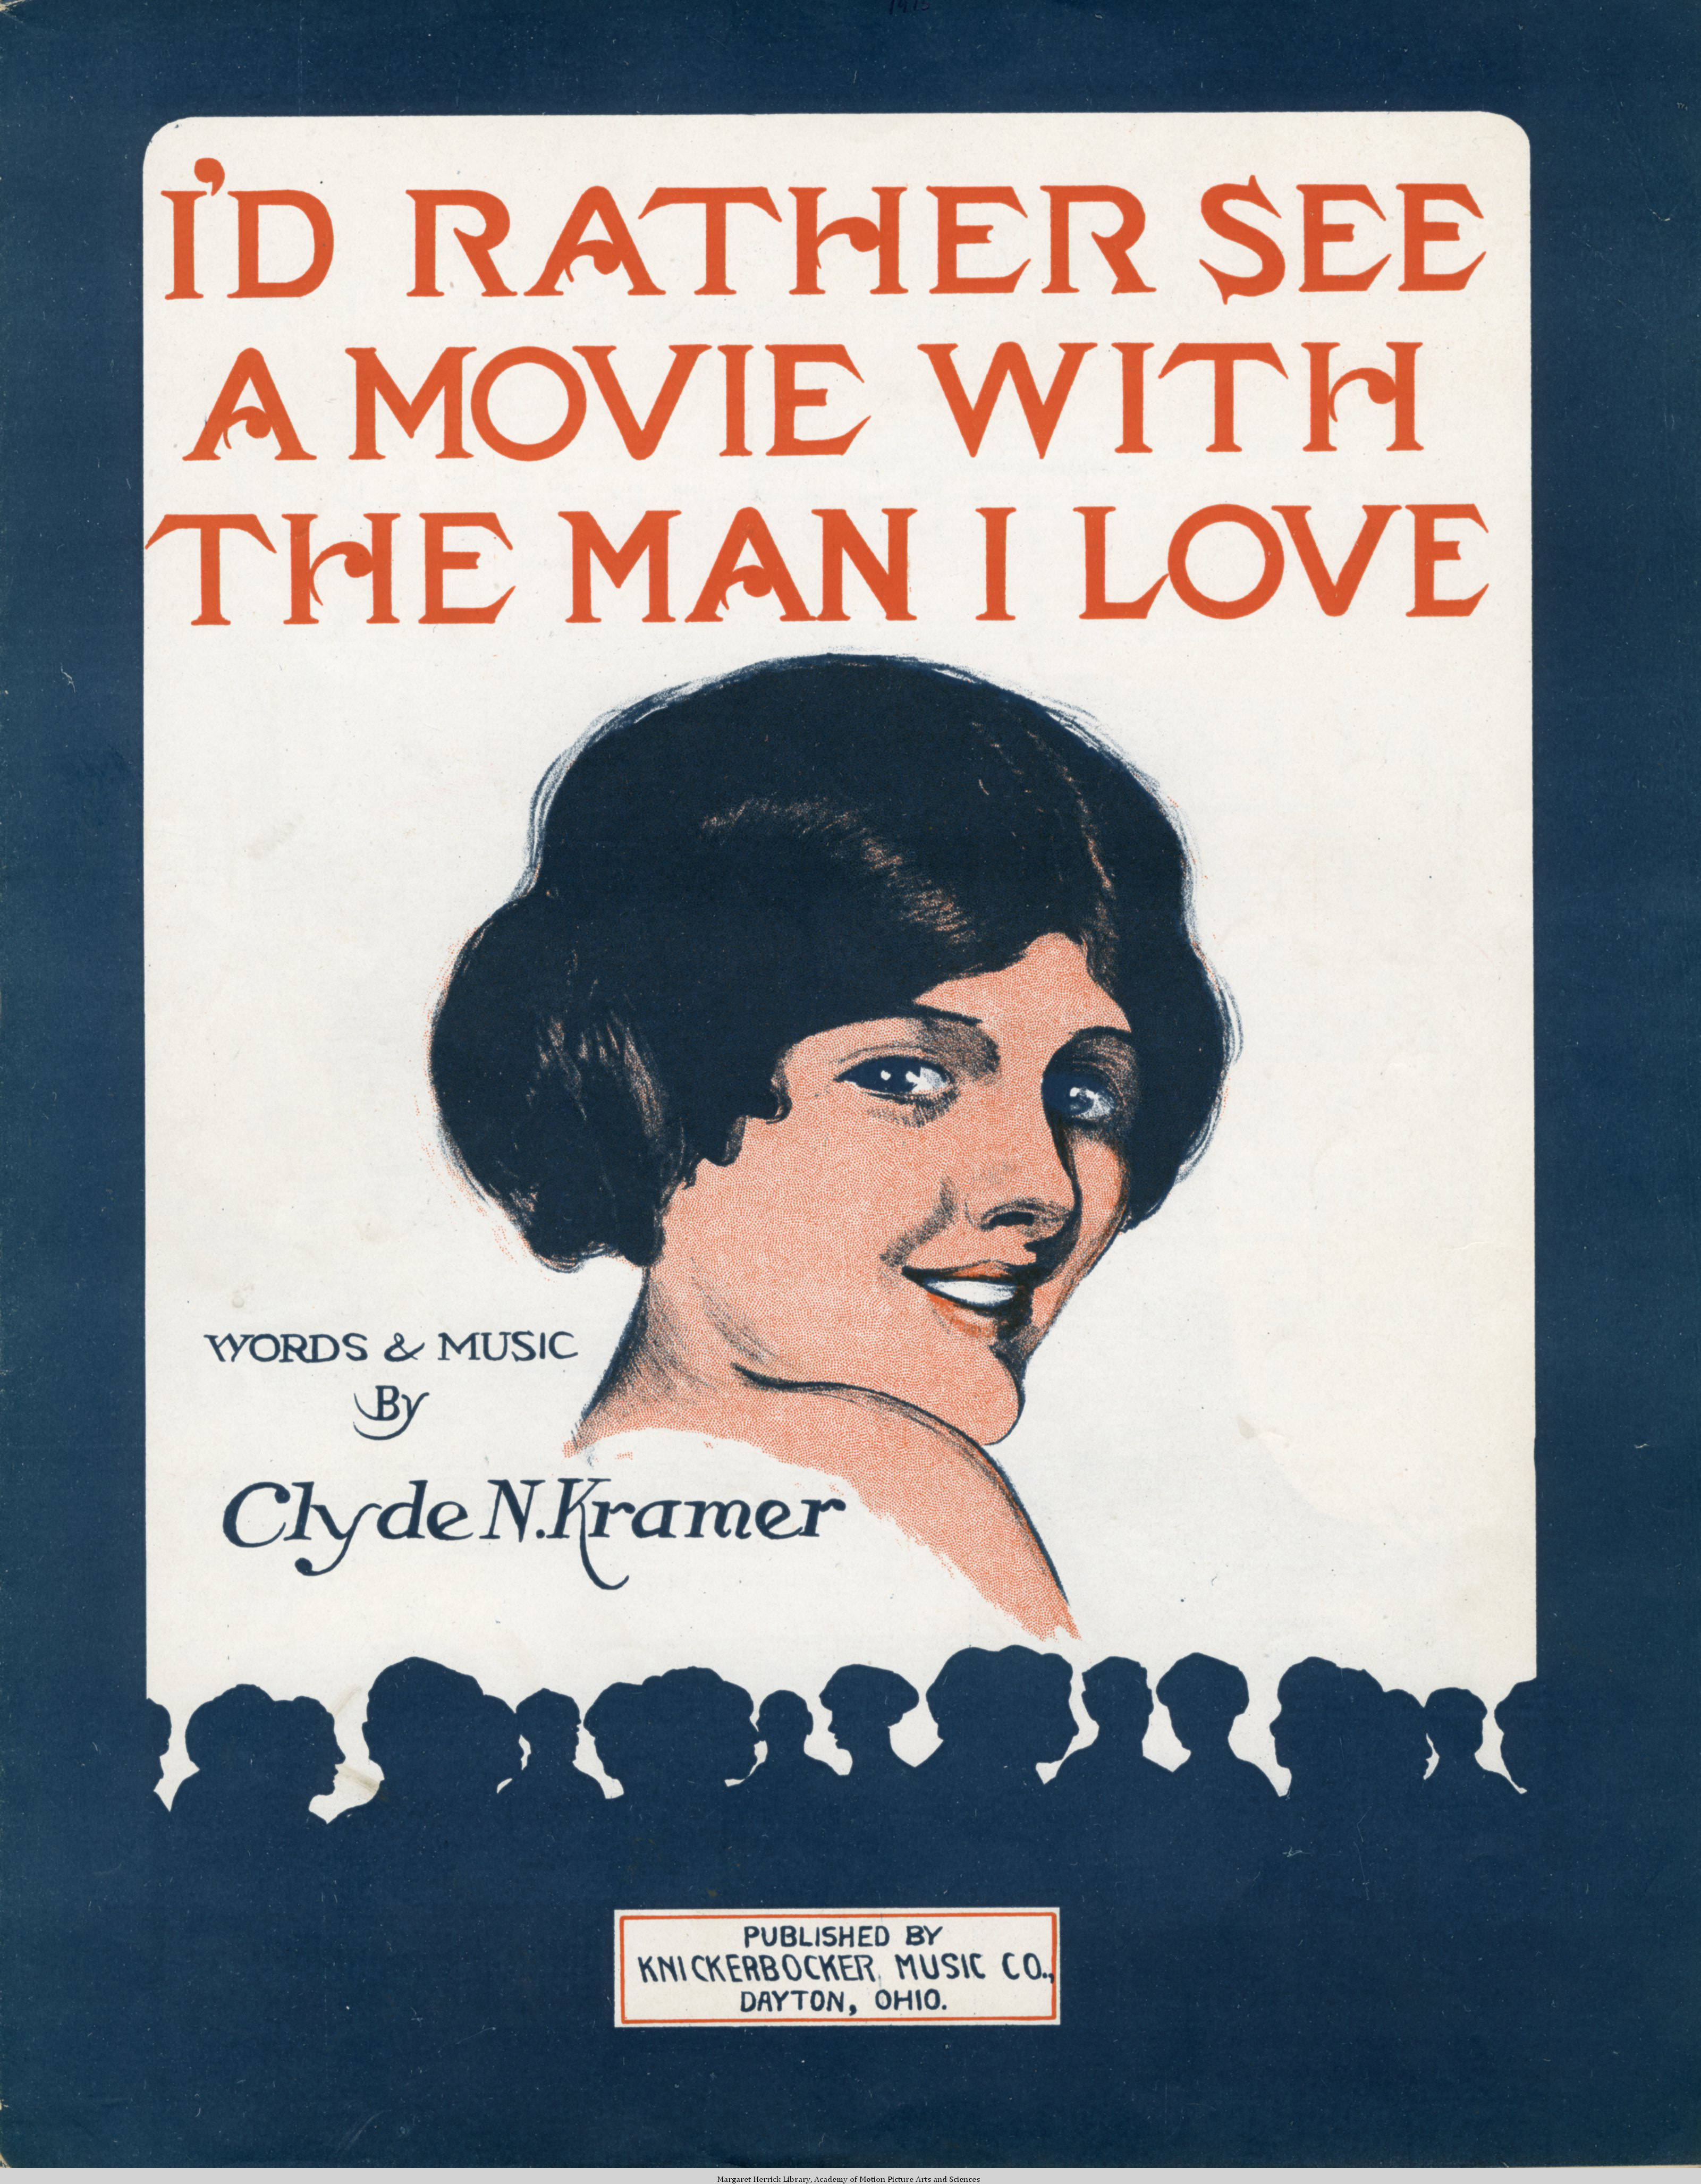 Sheet music cover - I'D RATHER SEE A MOVIE WITH THE MAN I LOVE (1915)